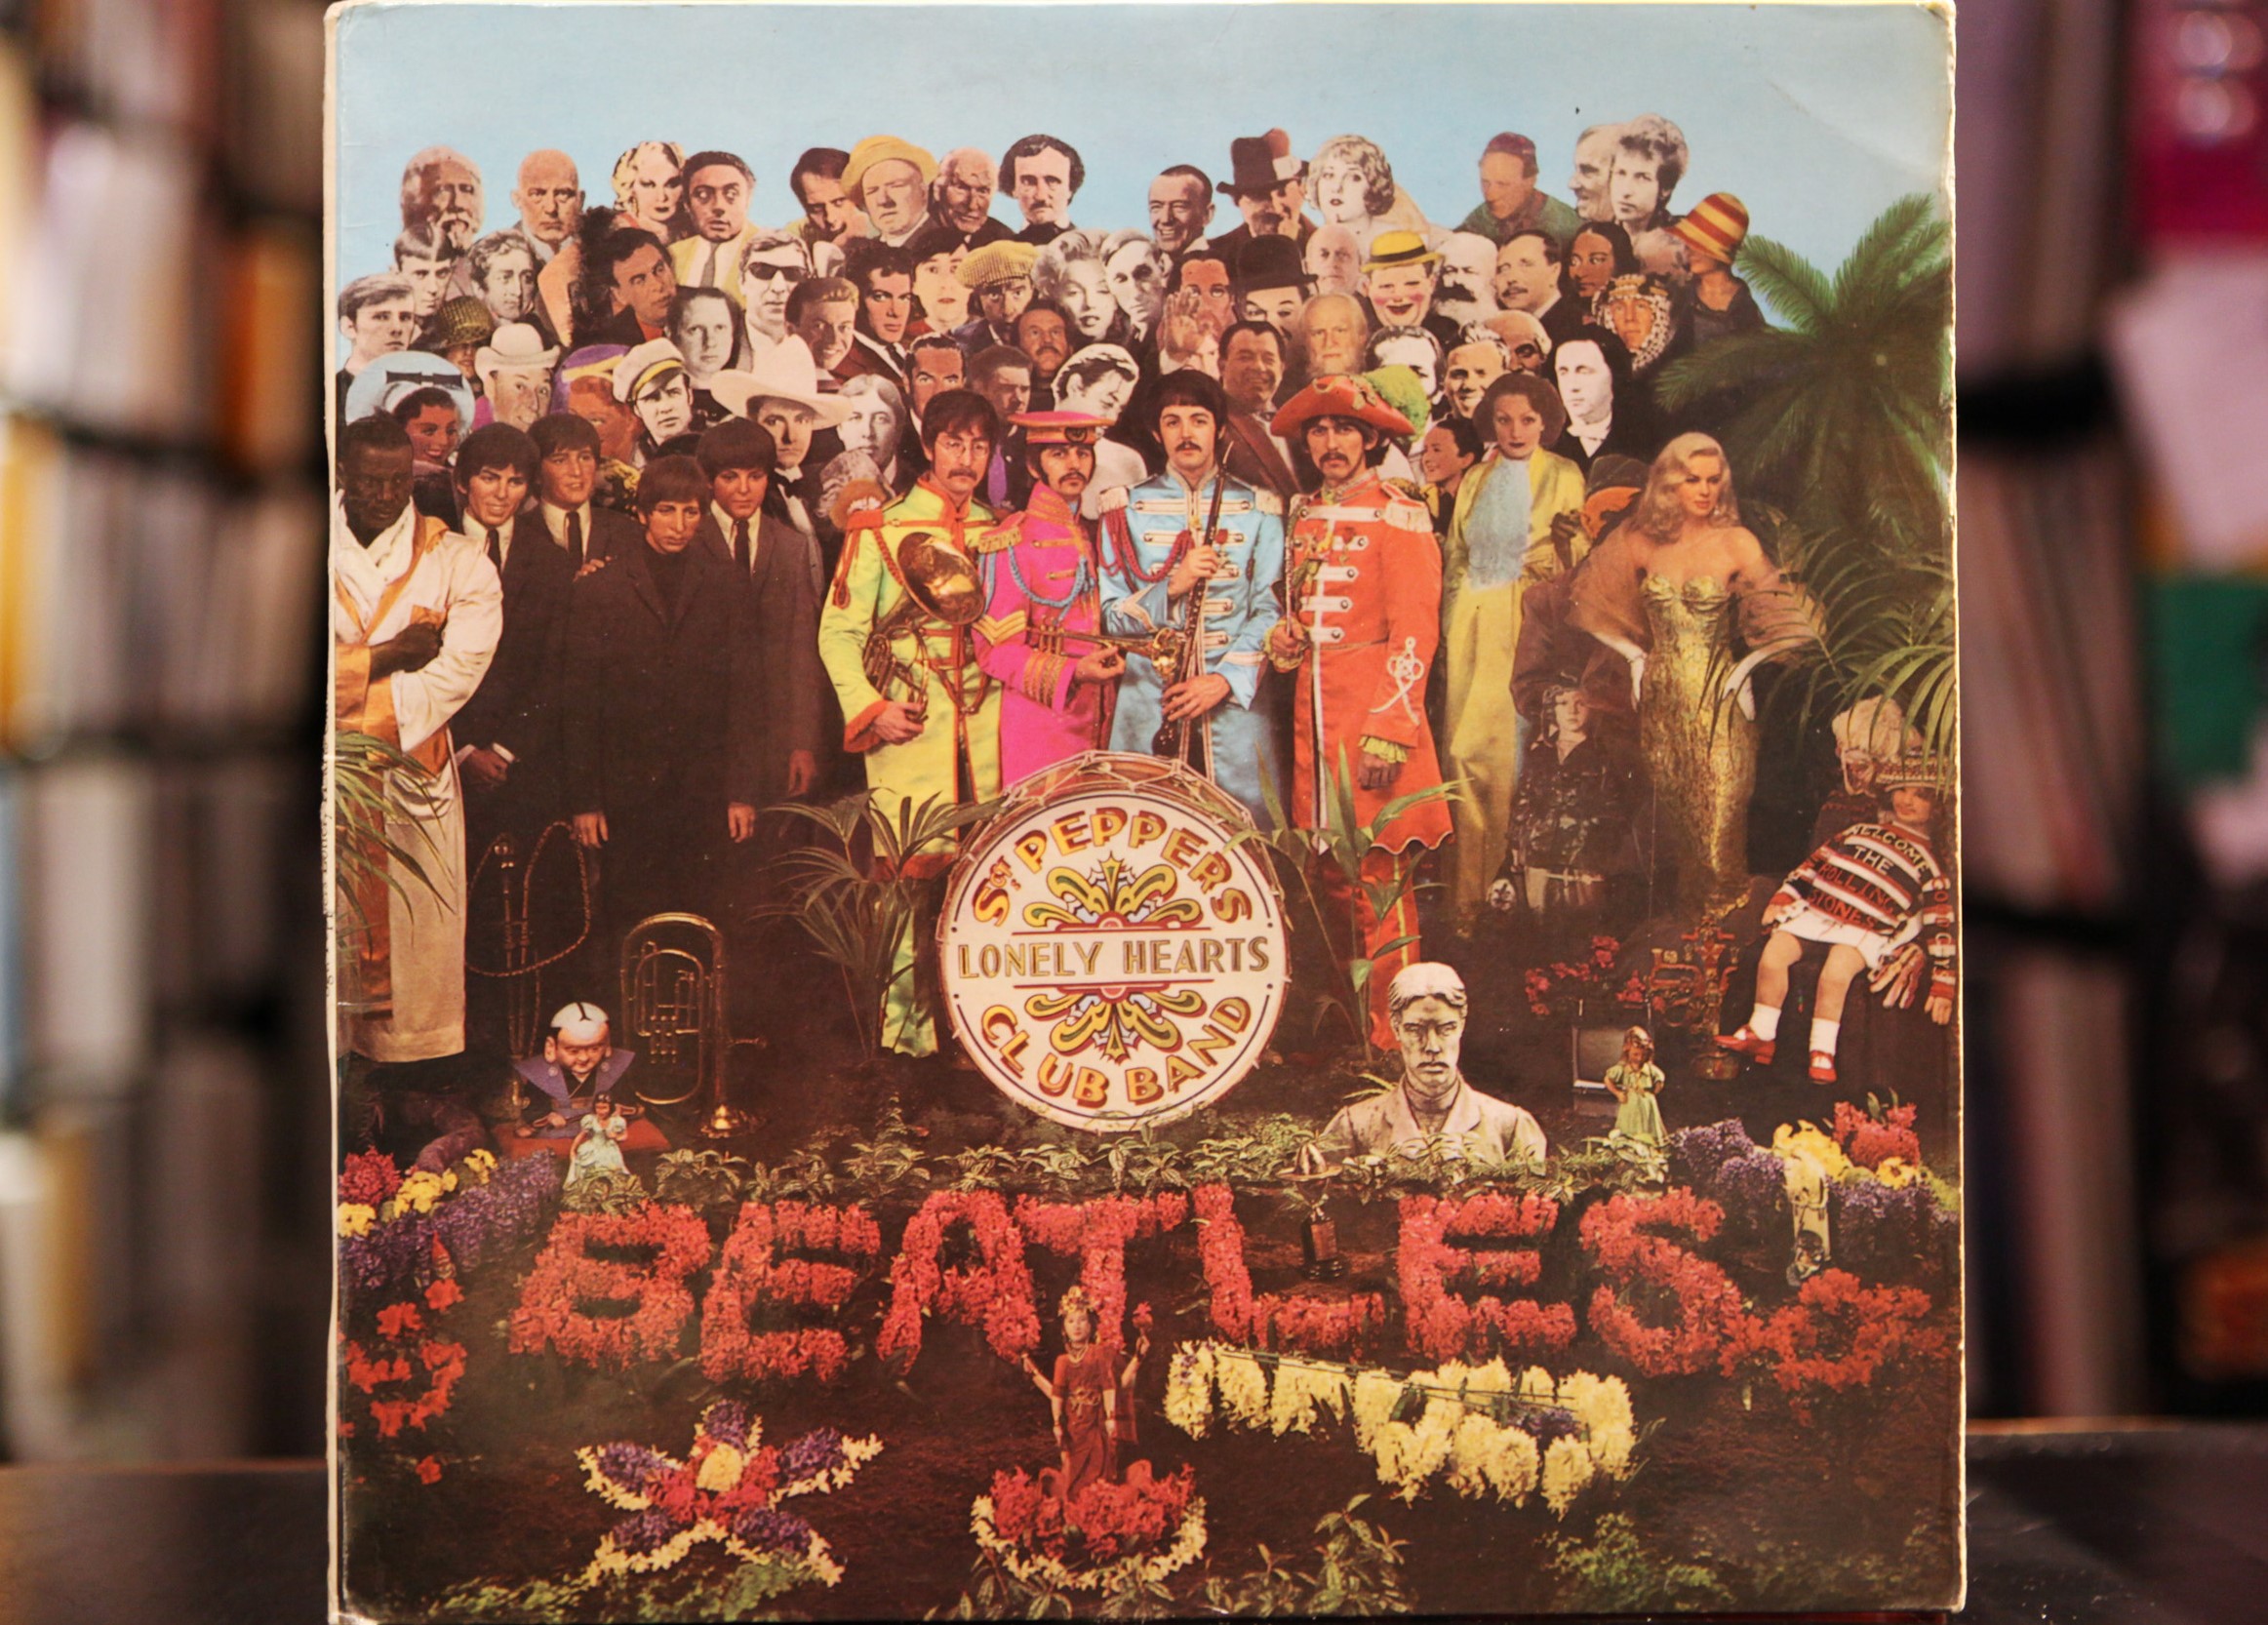 A vinyl copy of The Beatles' 'Sgt. Pepper's Lonely Hearts Club Band'